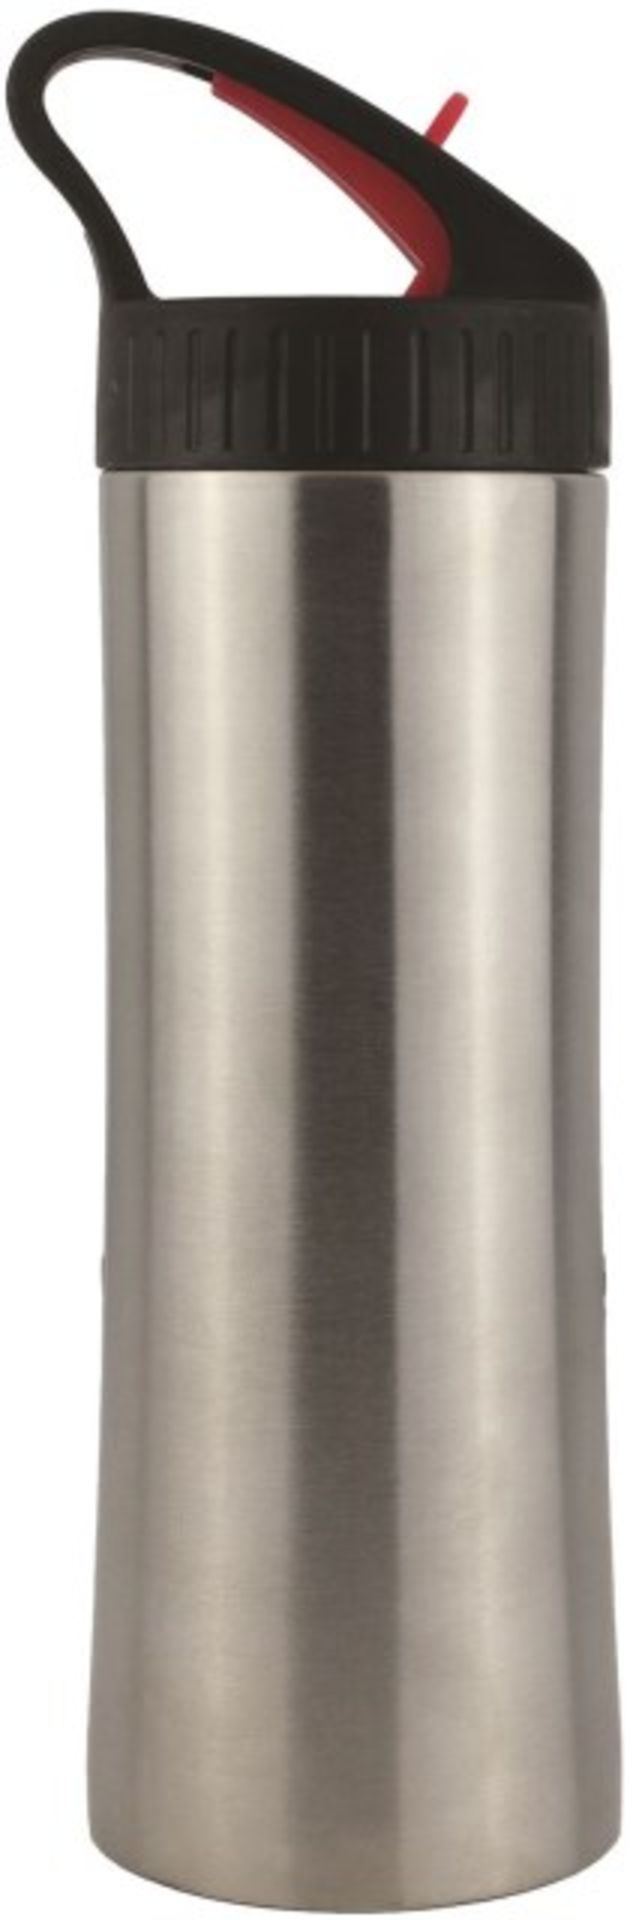 V Grade A Aluminium Drinks Flask X 2 Bid price to be multiplied by Two